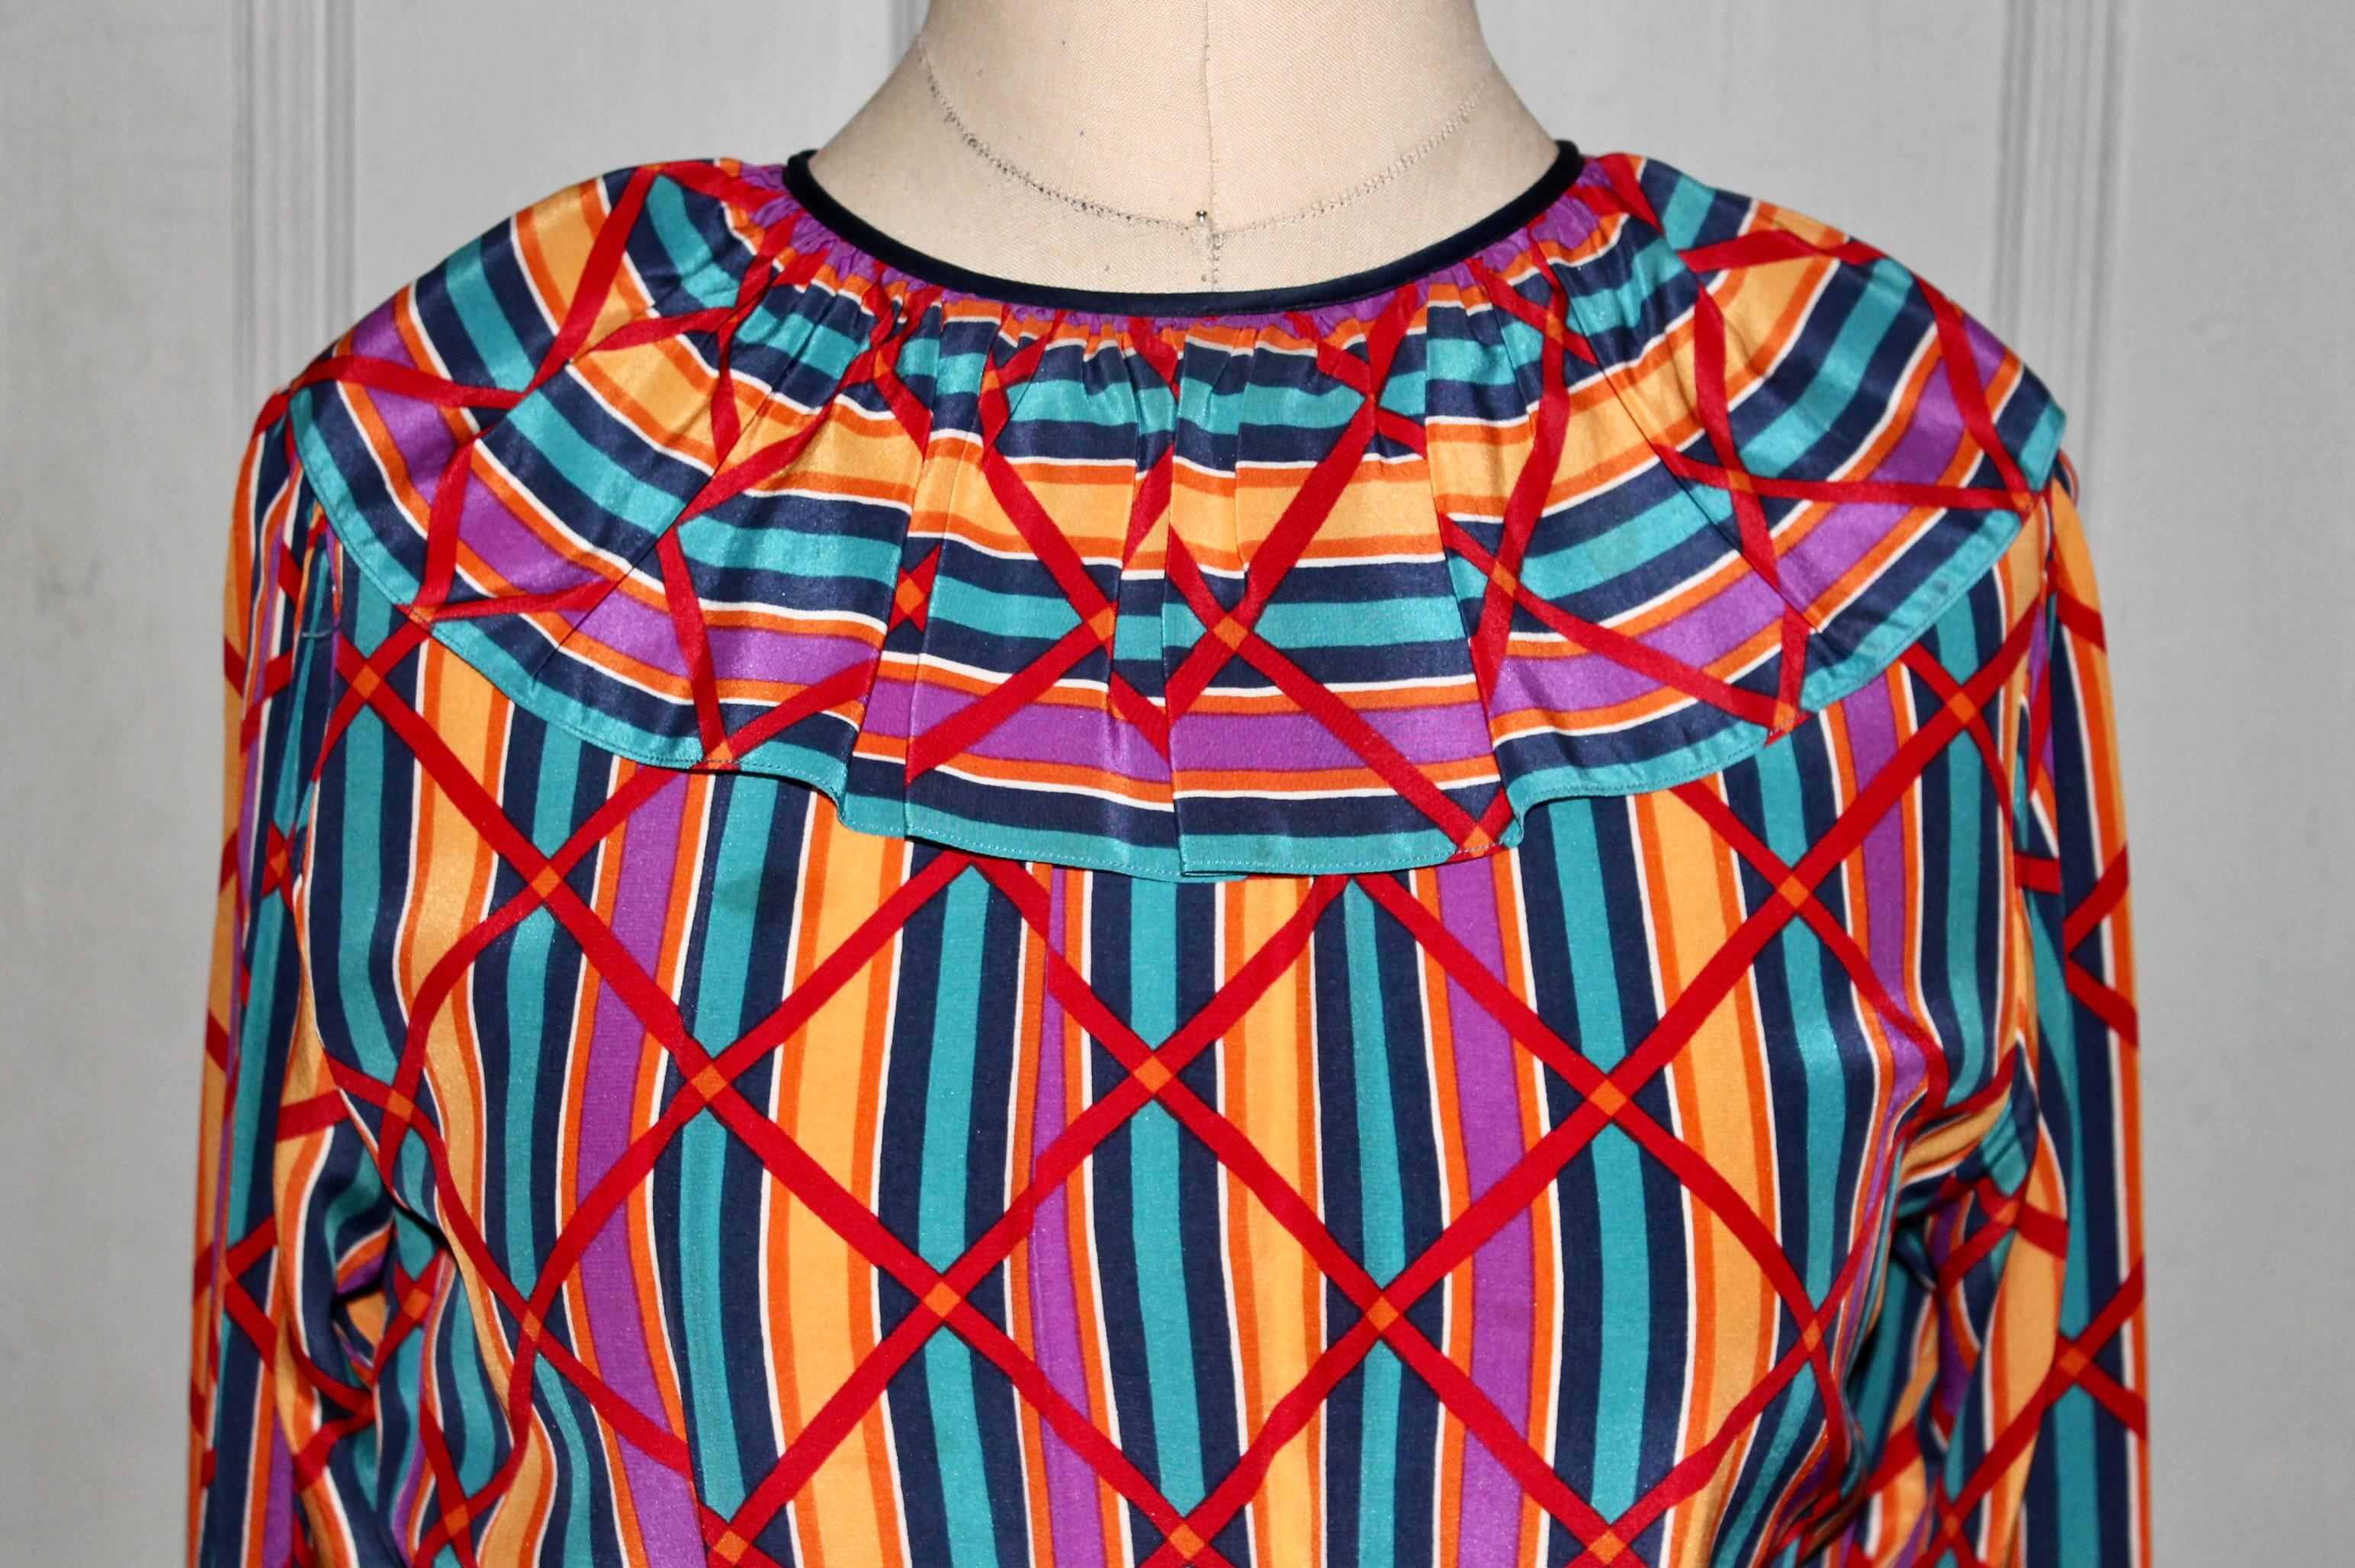 YSL Yves Saint Laurent 1970's Rive Gauche Silk Day Dress In Excellent Condition For Sale In Sharon, CT